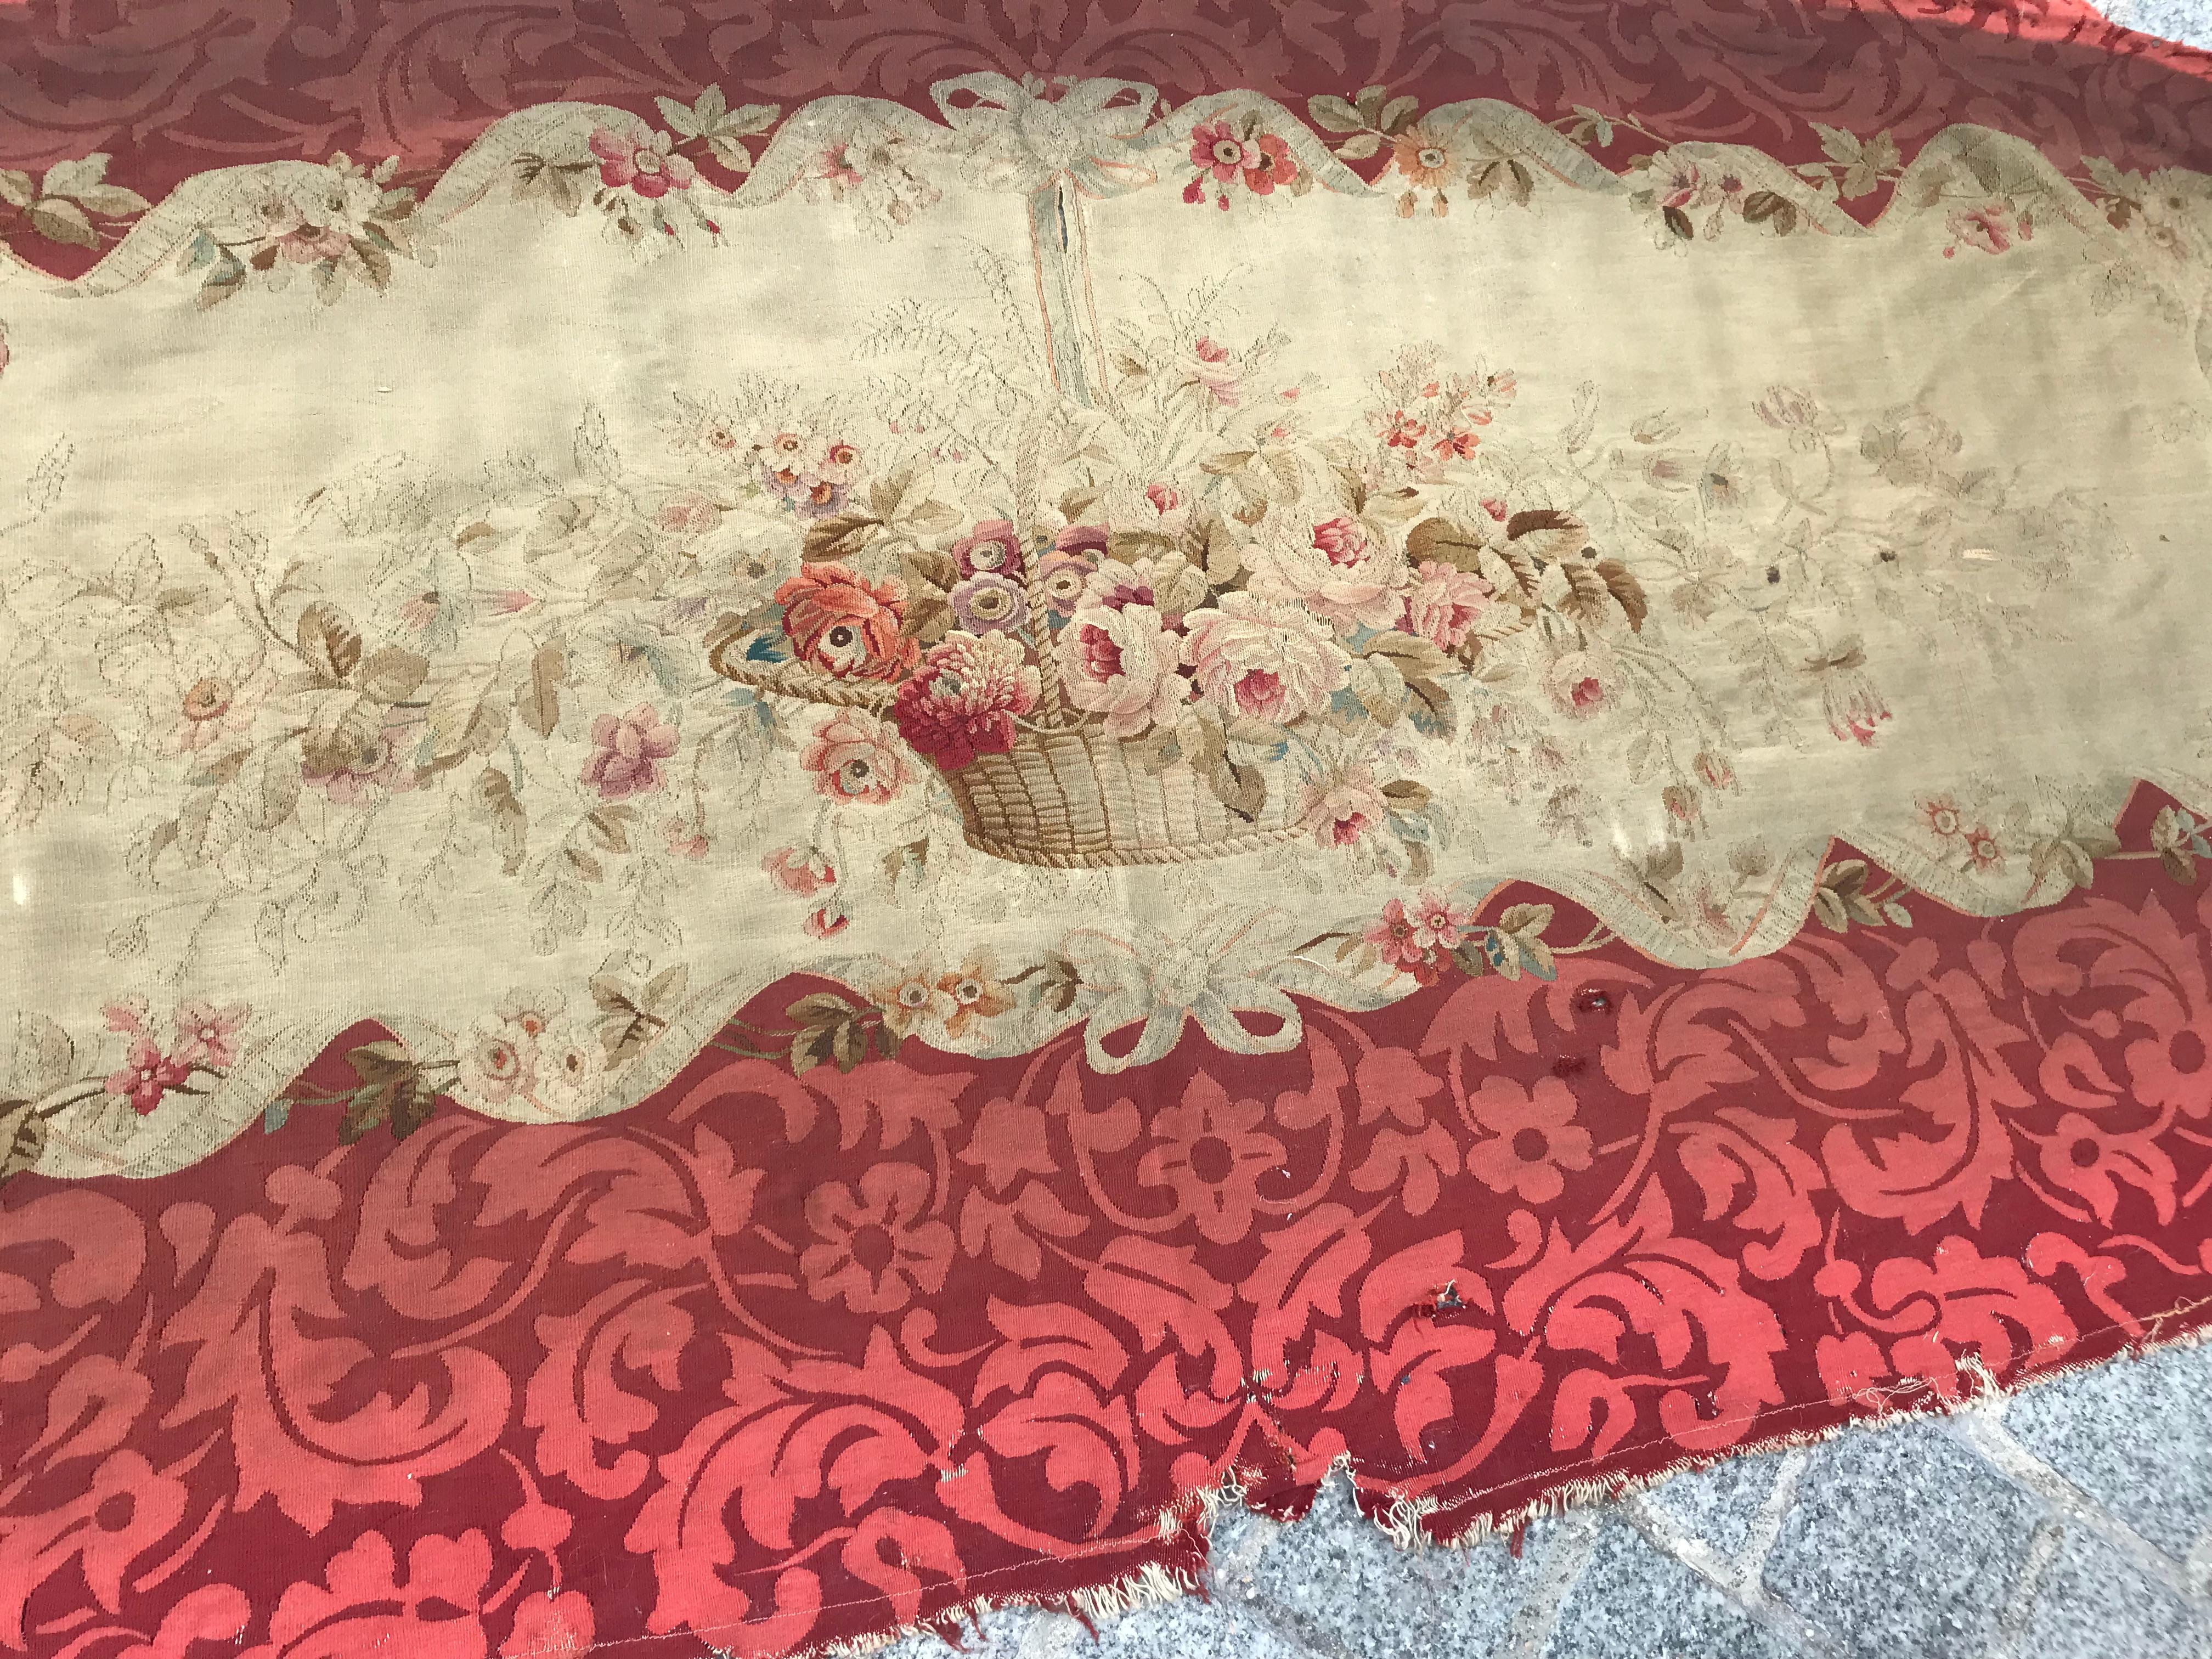 Hand-Woven 19th Century Aubusson Tapestry Sofa Cover